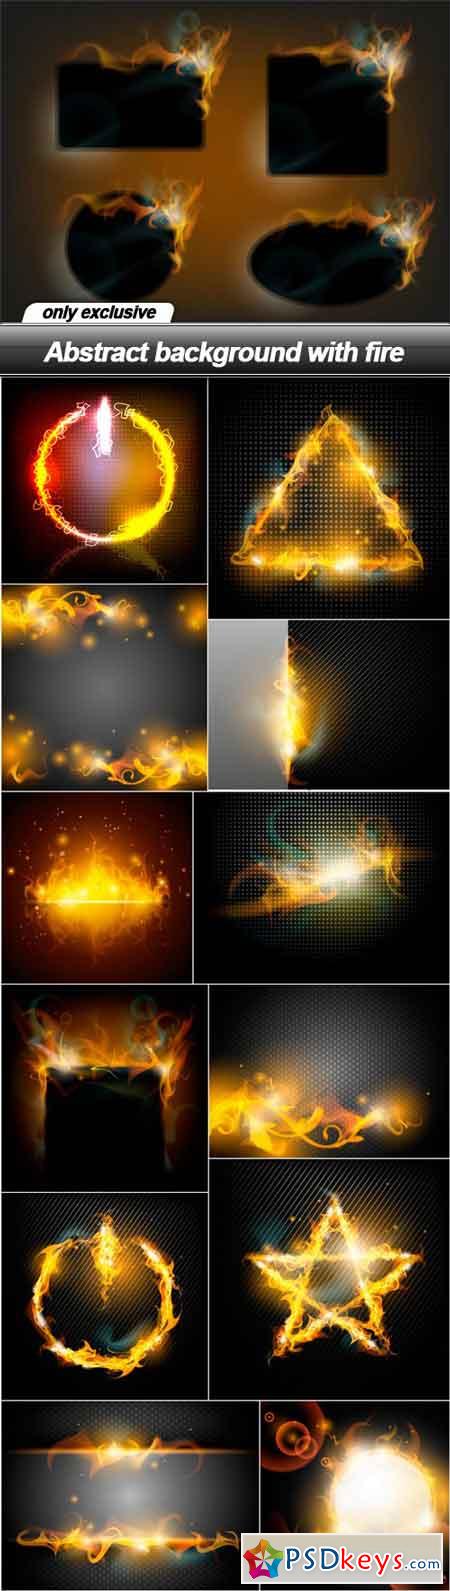 Abstract background with fire - 13 EPS